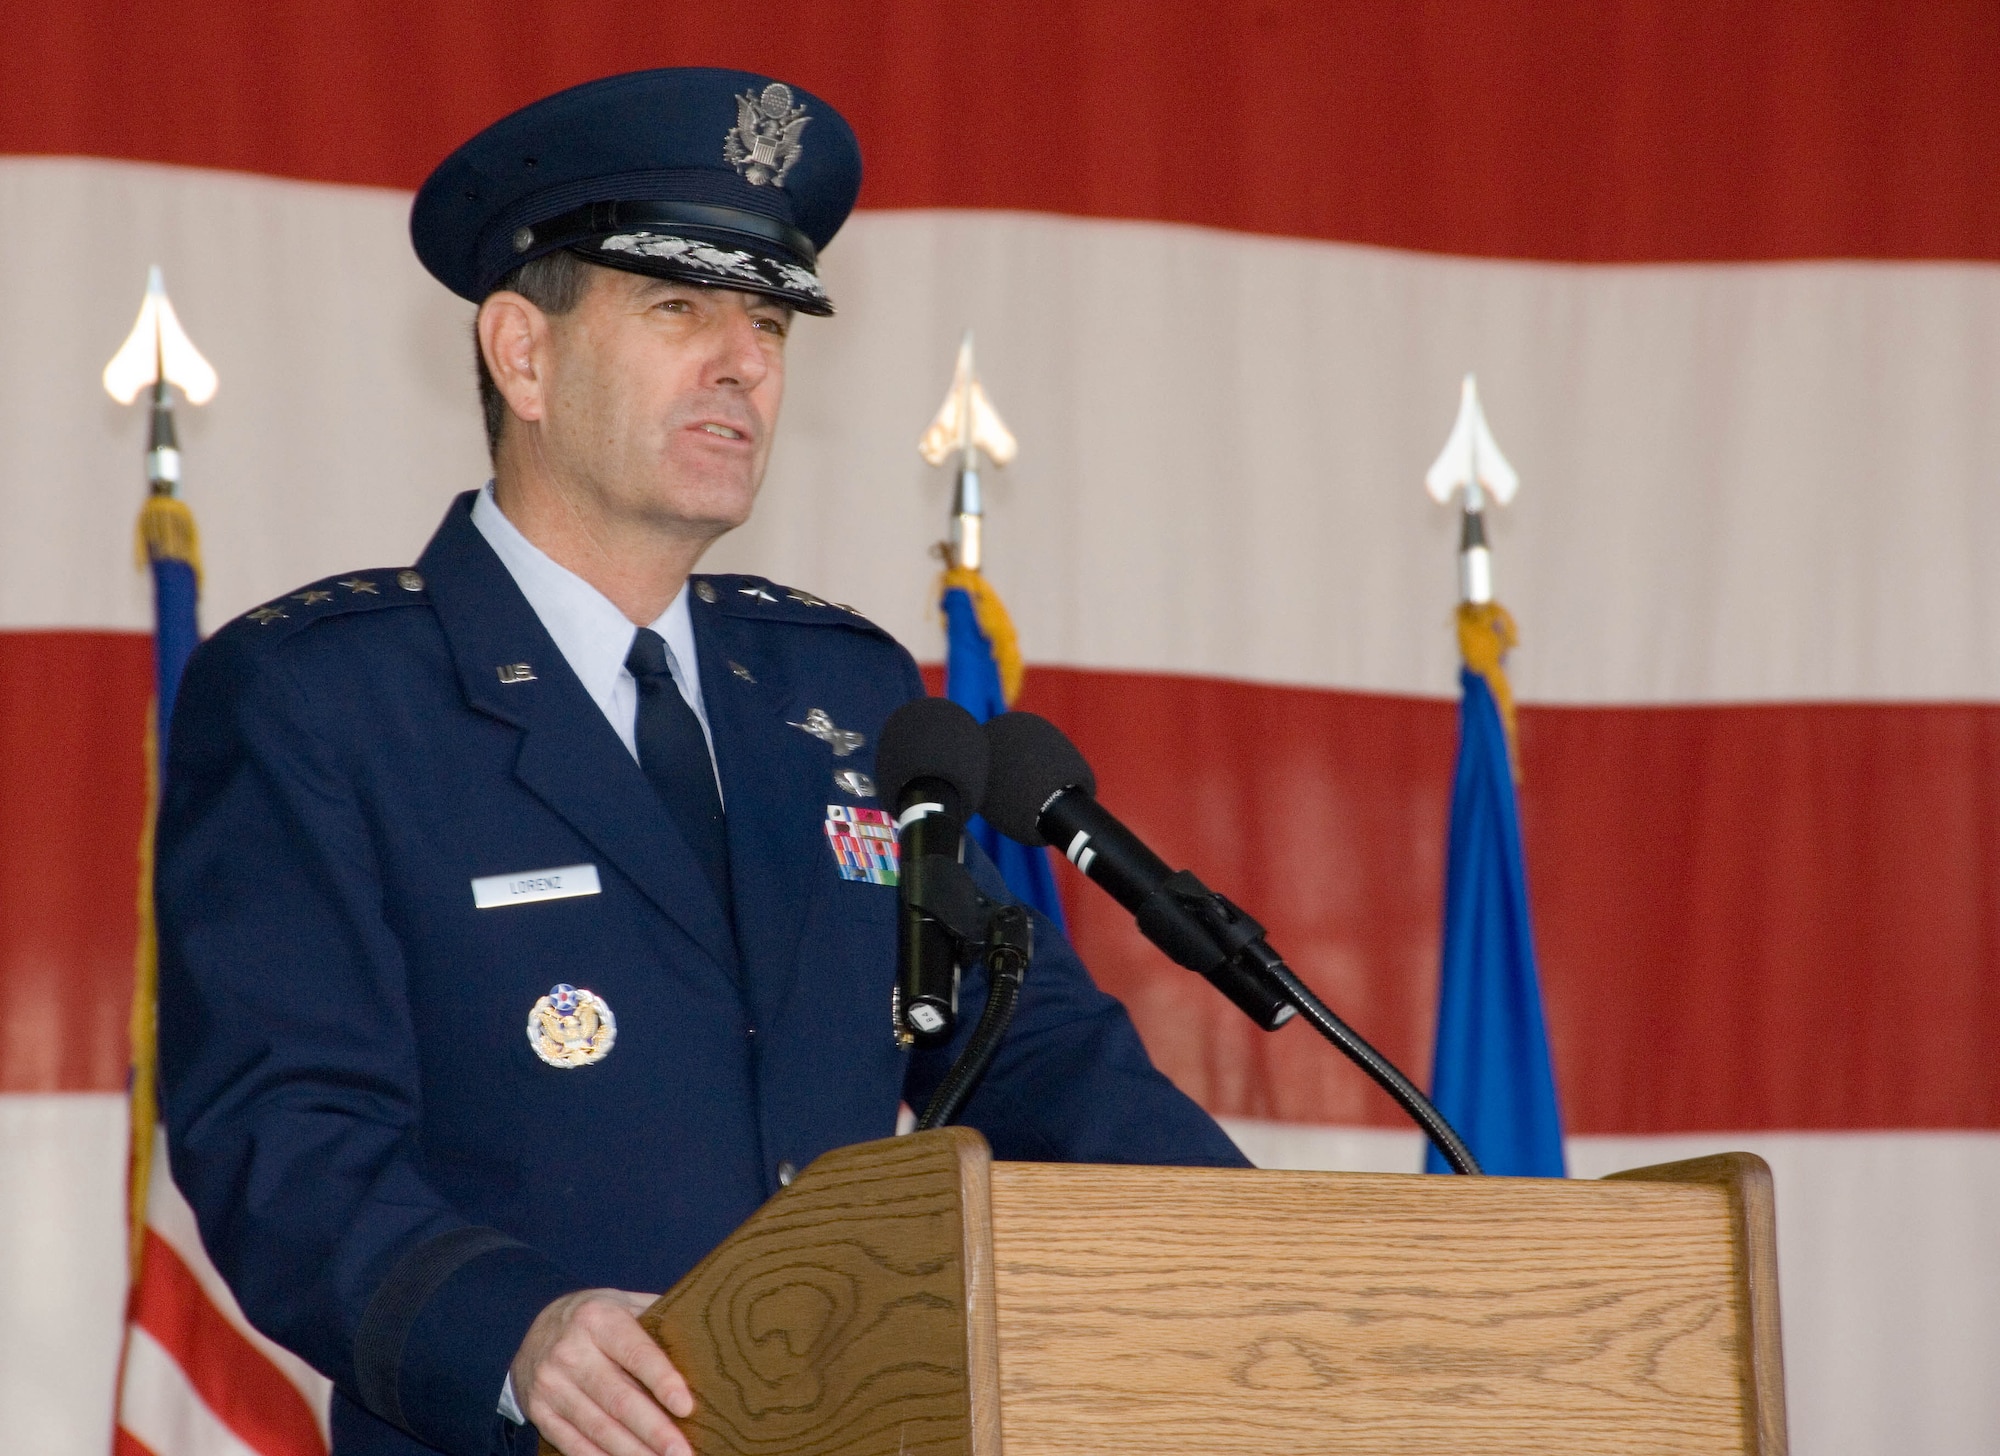 Lt. Gen. Stephen Lorenz speaks at the 42nd Air Base Wing change of command ceremony in this March 20, 2007, file photo. The U.S. Senate confirmed General Lorenz for his fourth star and to succeed Gen. William R. Looney III as commander of Air Education and Training Command. (Courtesy photo)